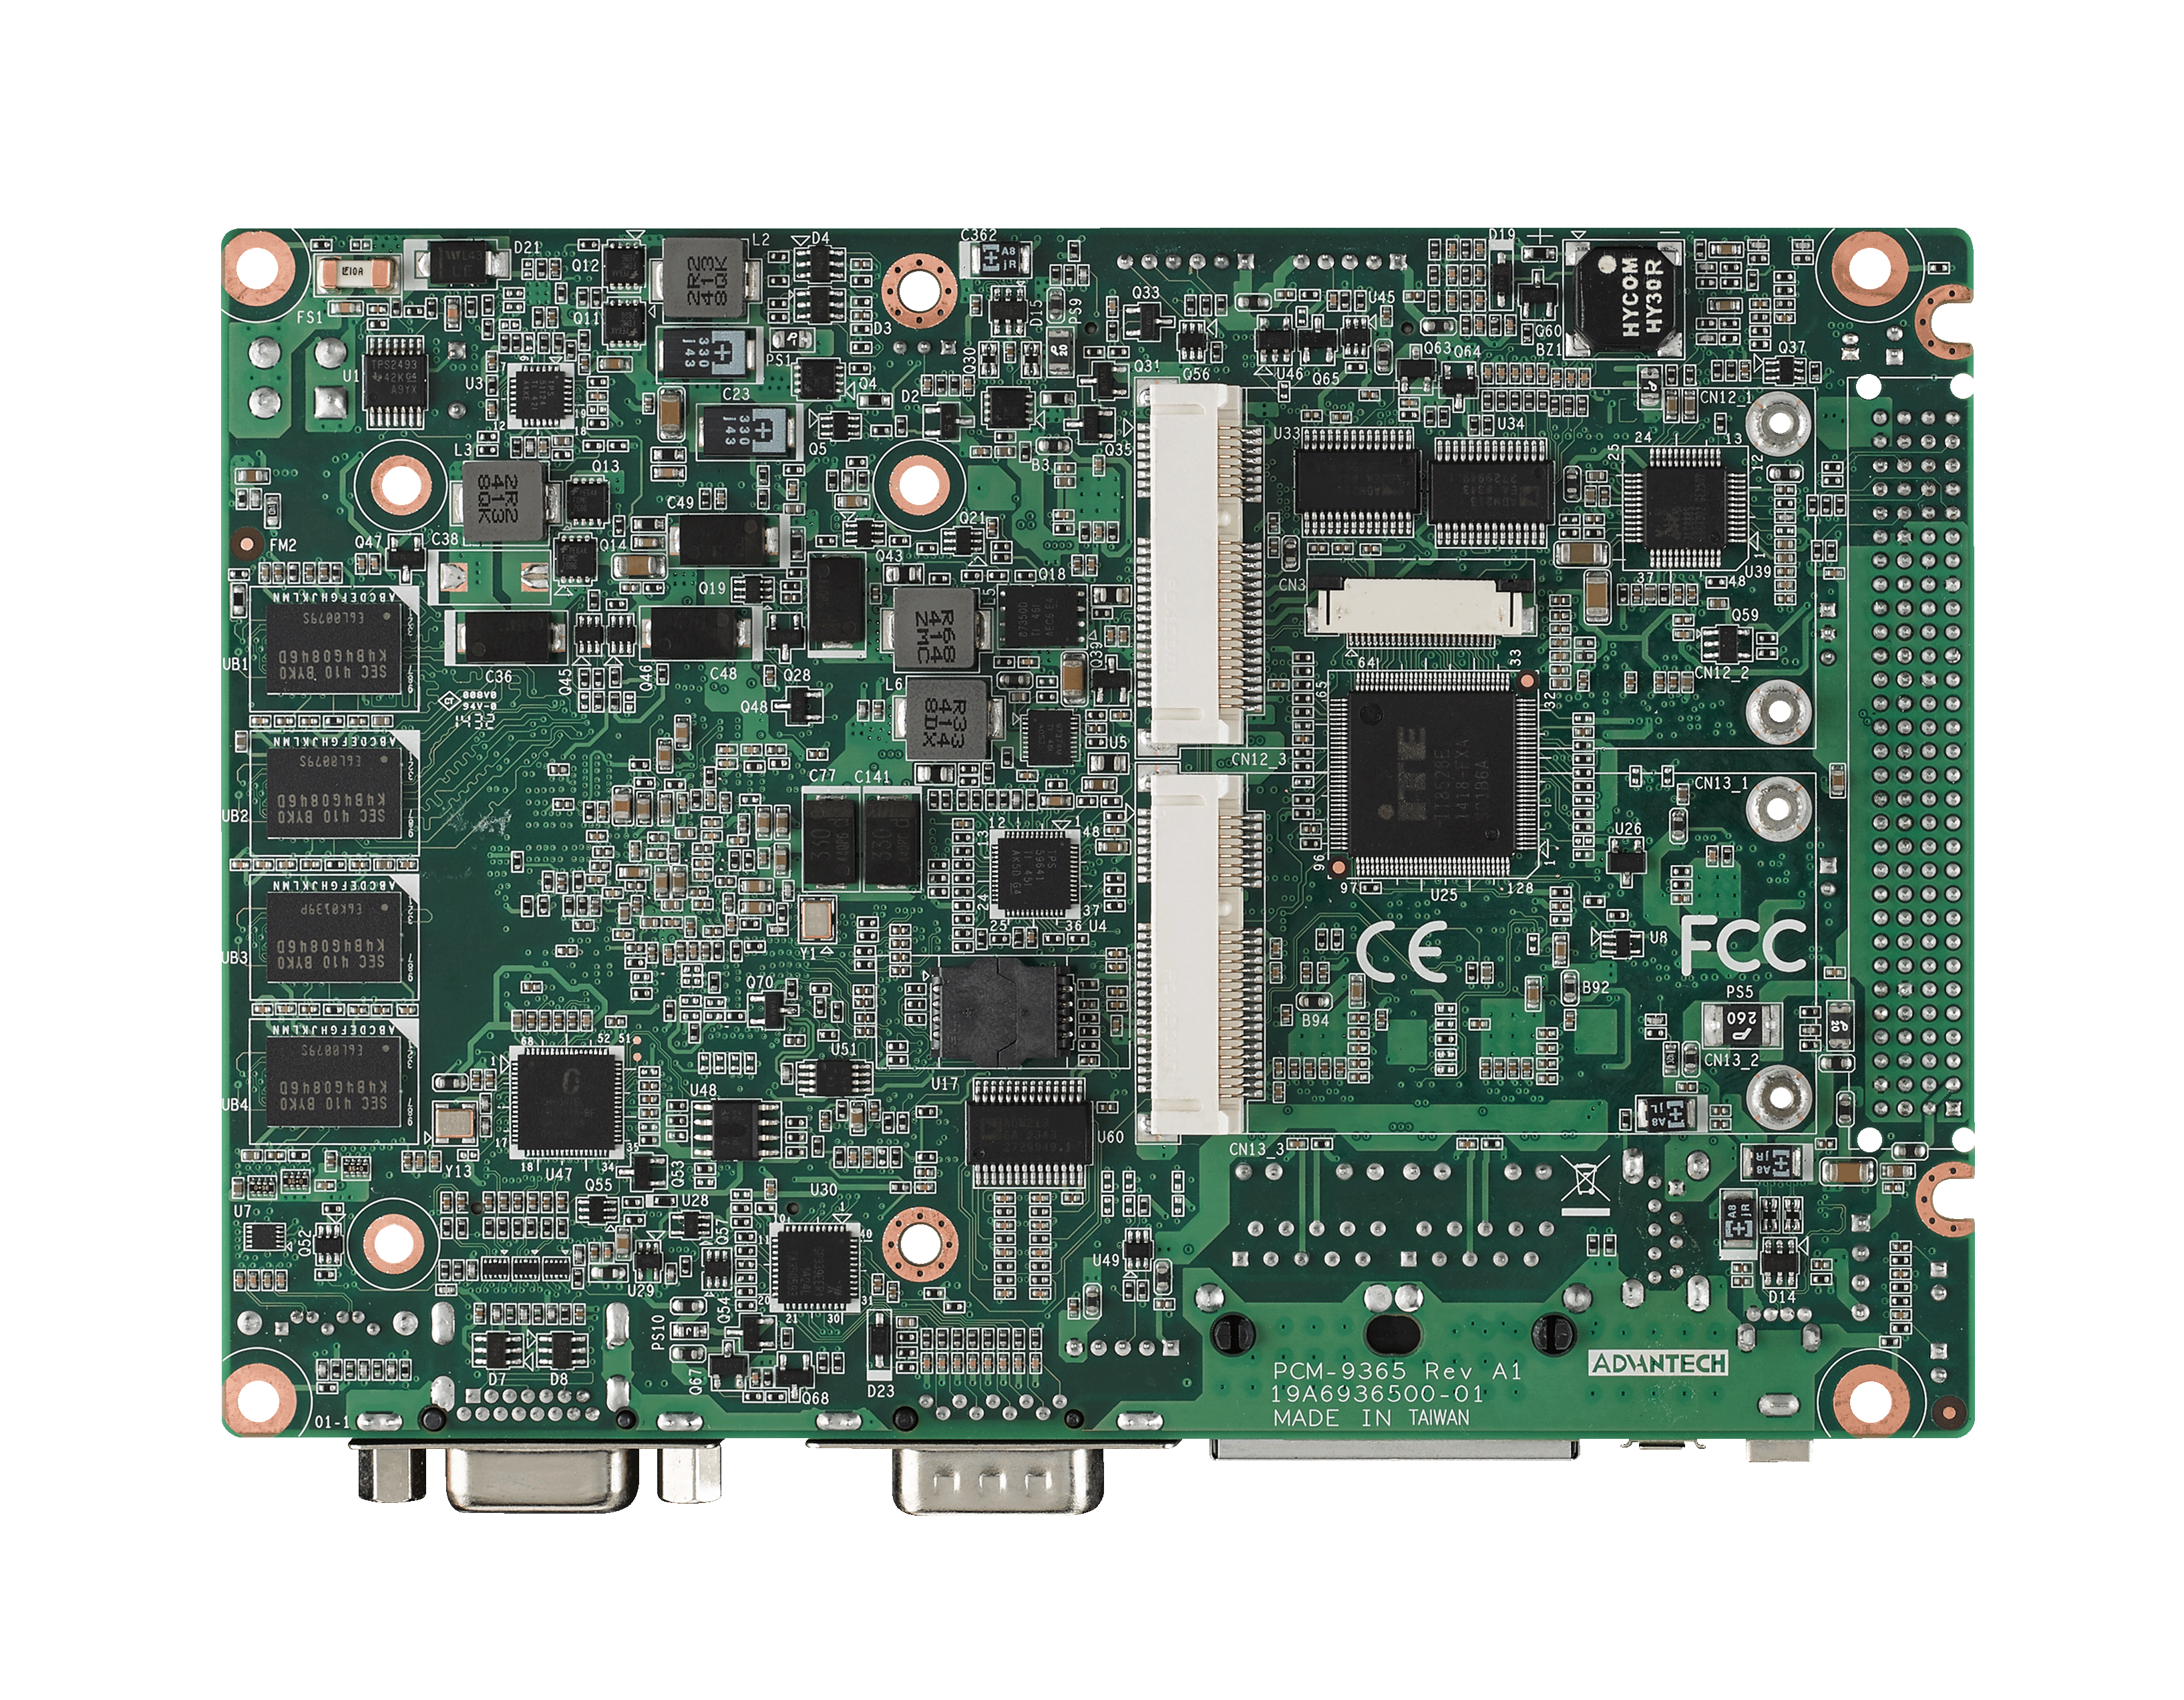 3.5" Embedded Single Board Computer Intel<sup>®</sup> Celeron N2930, onboard 4GB, 48-bit LVDS, 2GbE, Mini PCIe, PCI-104, VGA+LVDS,  Wide Temp Support (-40 ~ 85° C)